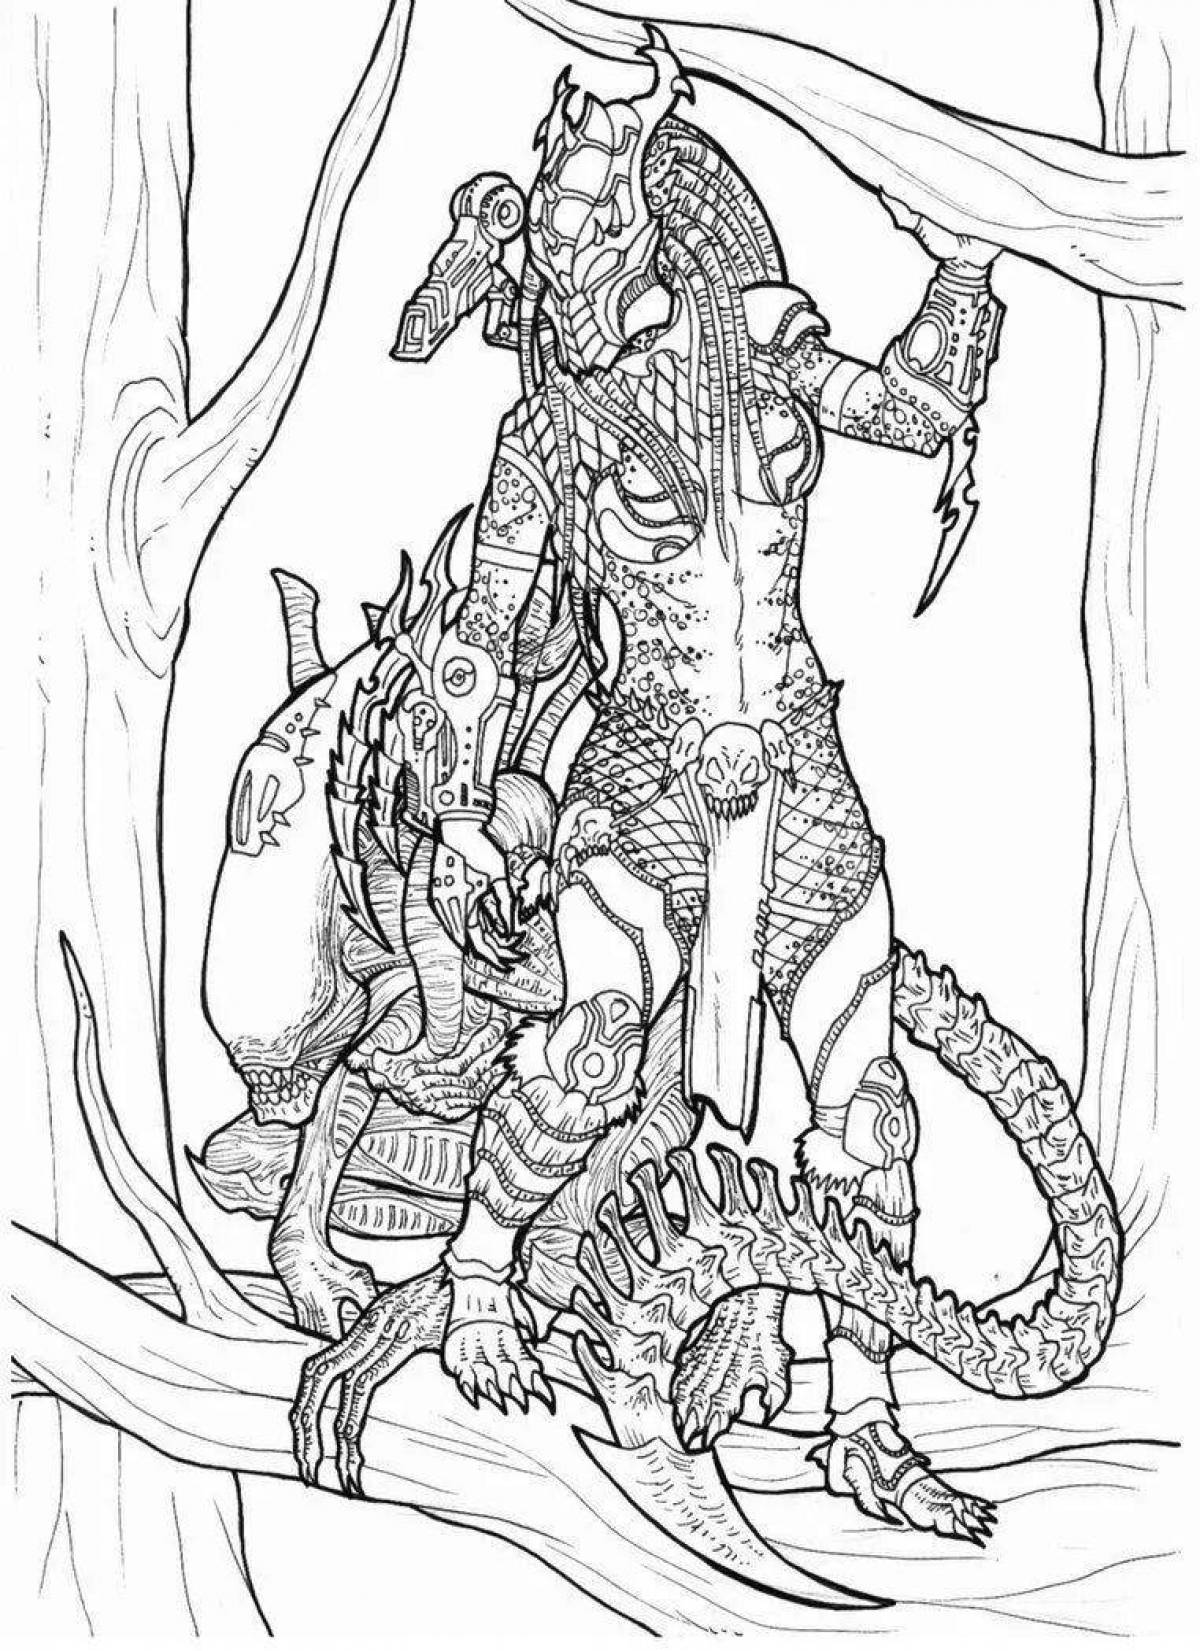 Alien and predator dynamic coloring page